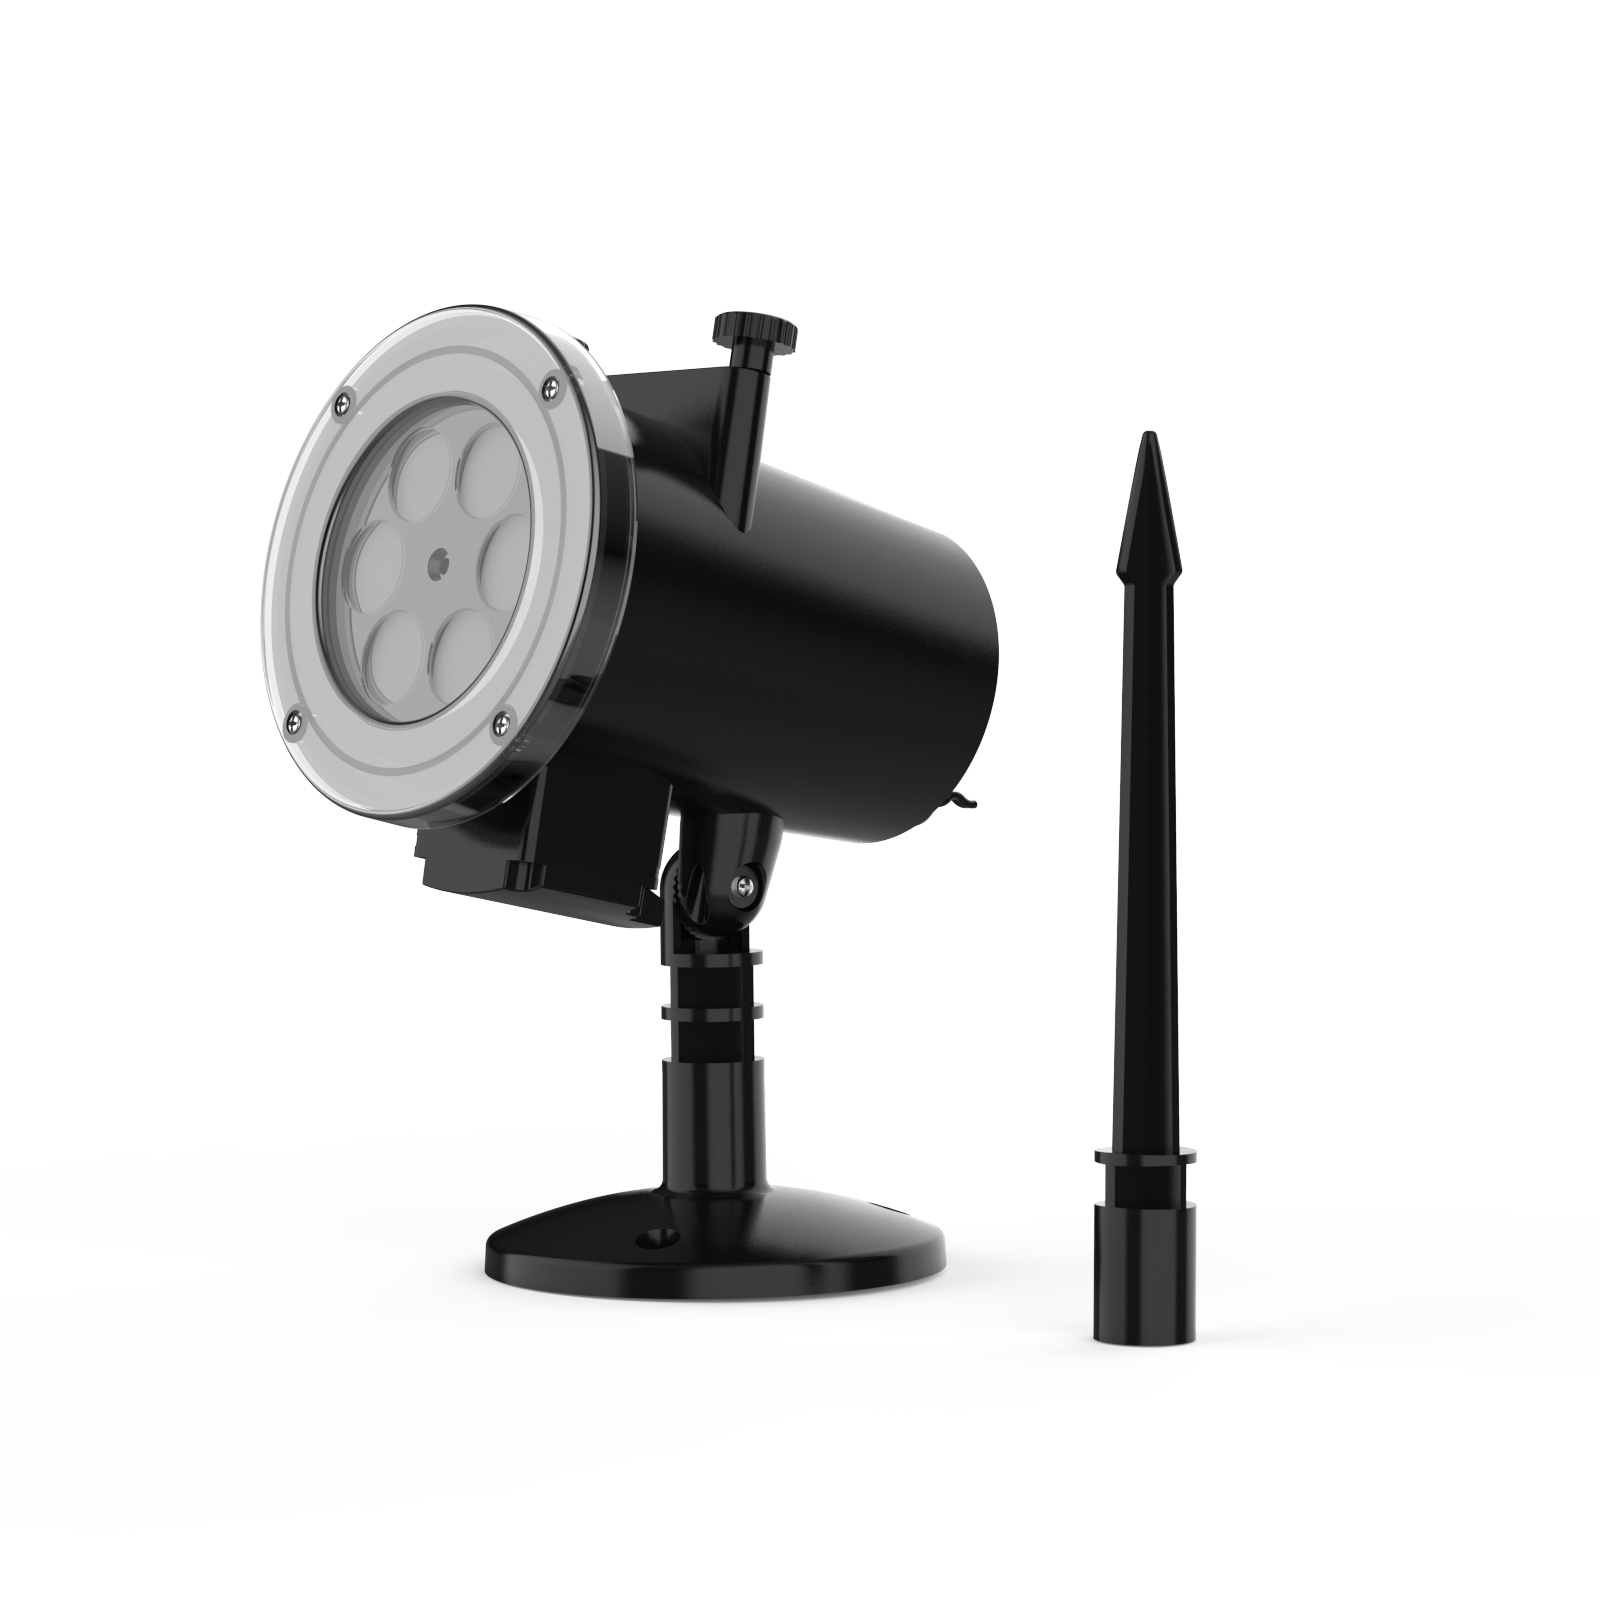 New outdoor high-brightness film projection lamp